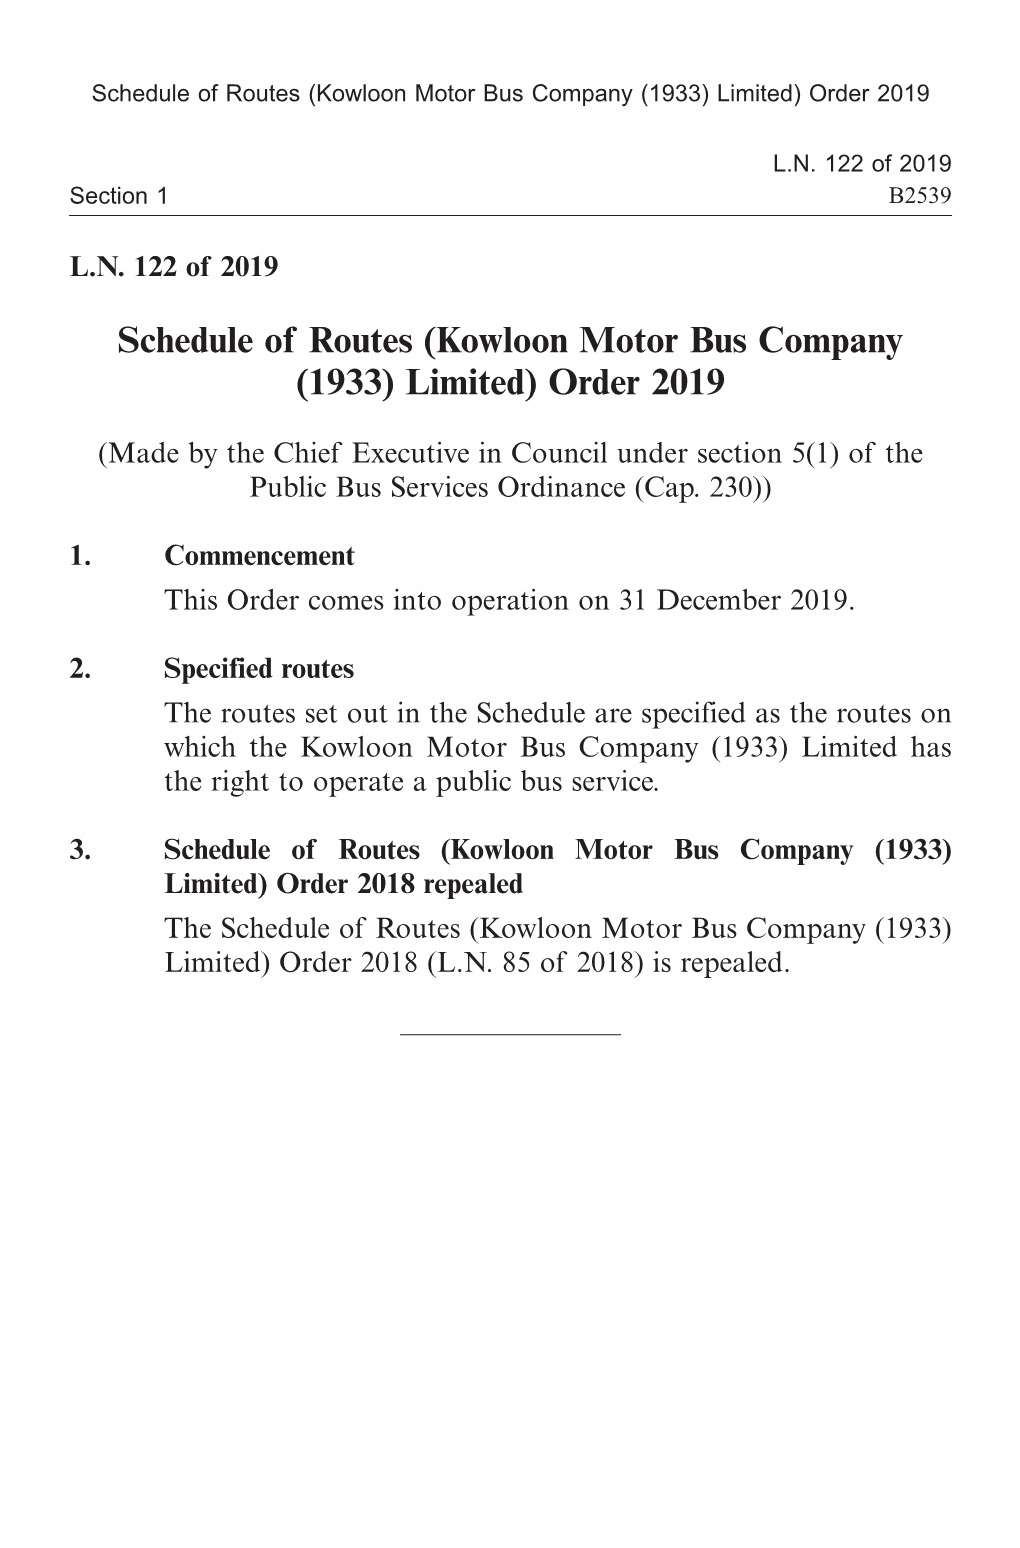 (Kowloon Motor Bus Company (1933) Limited) Order 2019